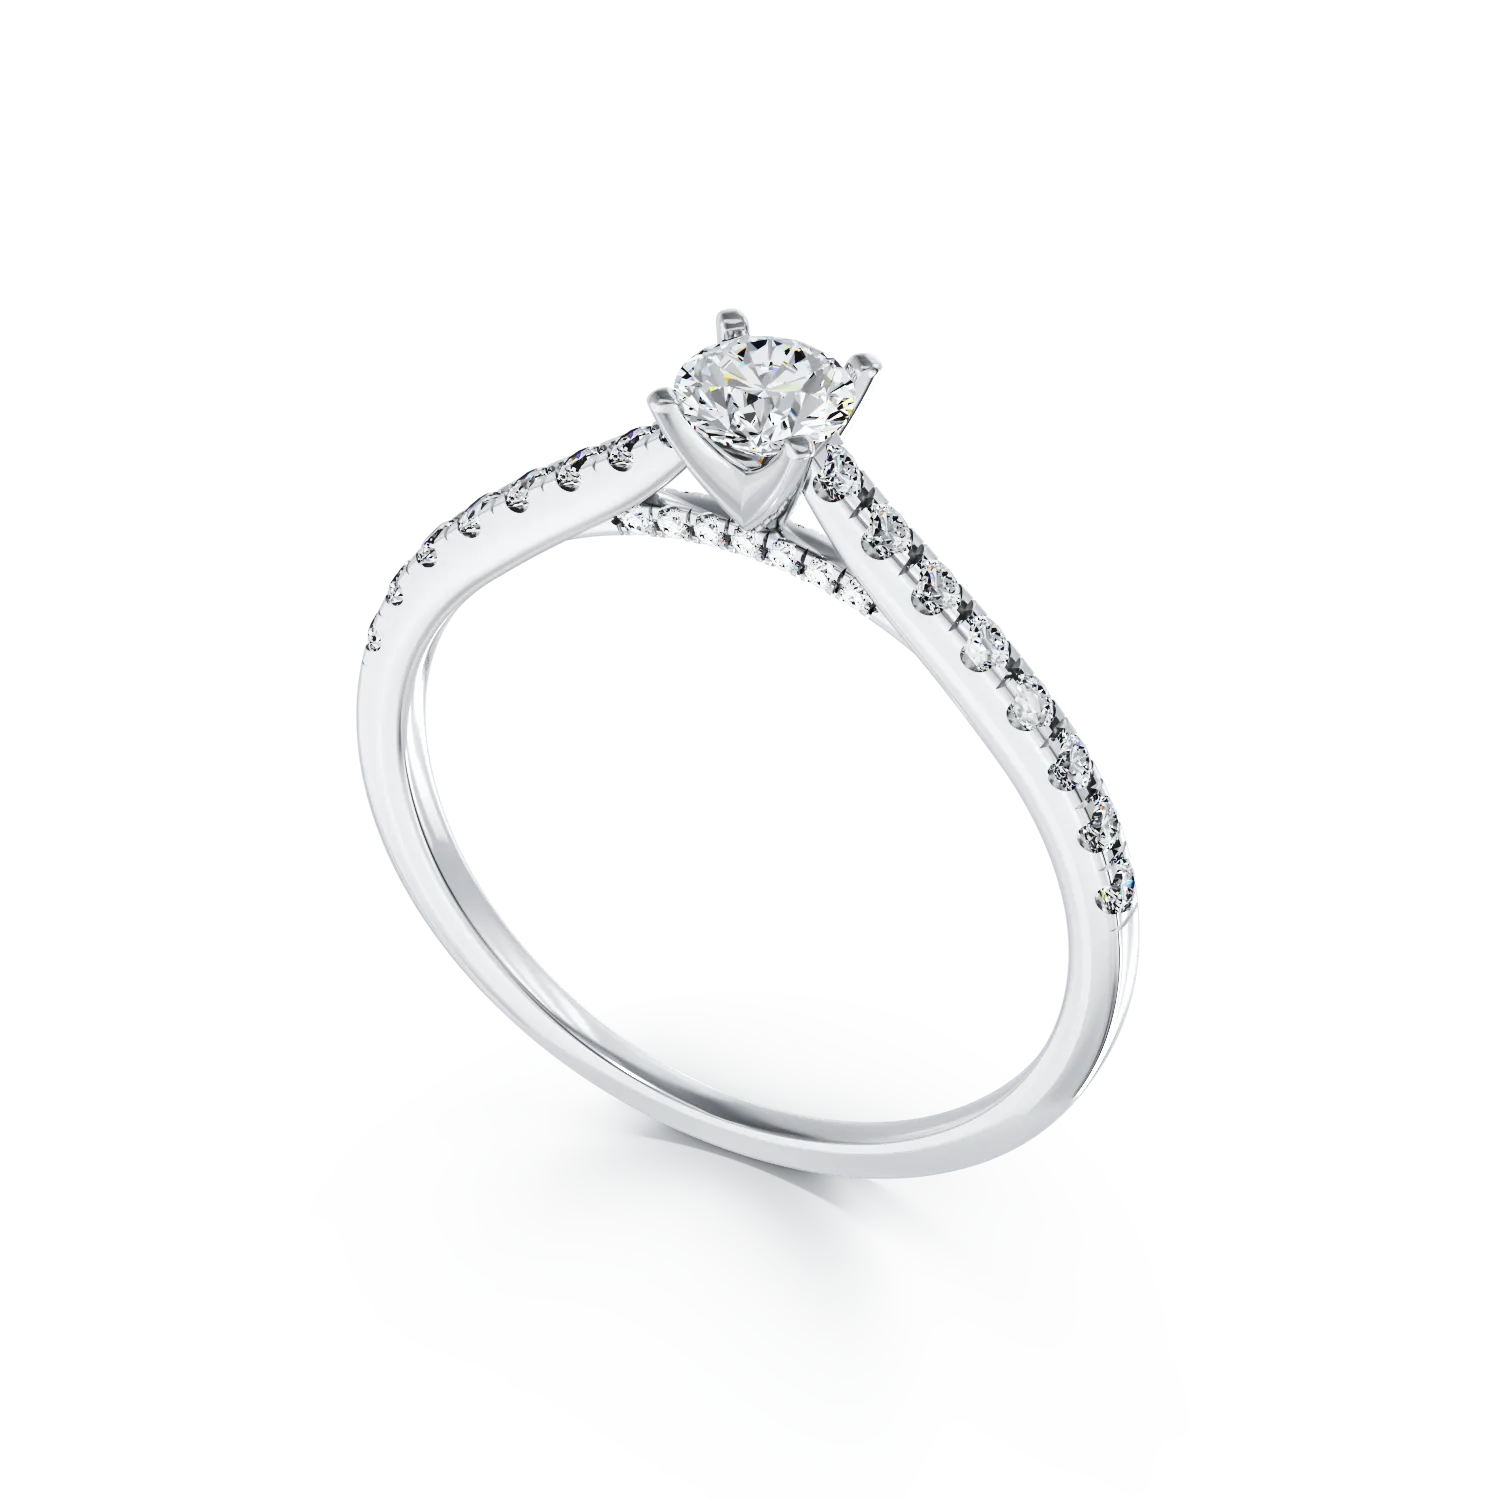 18K white gold engagement ring with 0.25ct diamond and 0.18ct diamonds